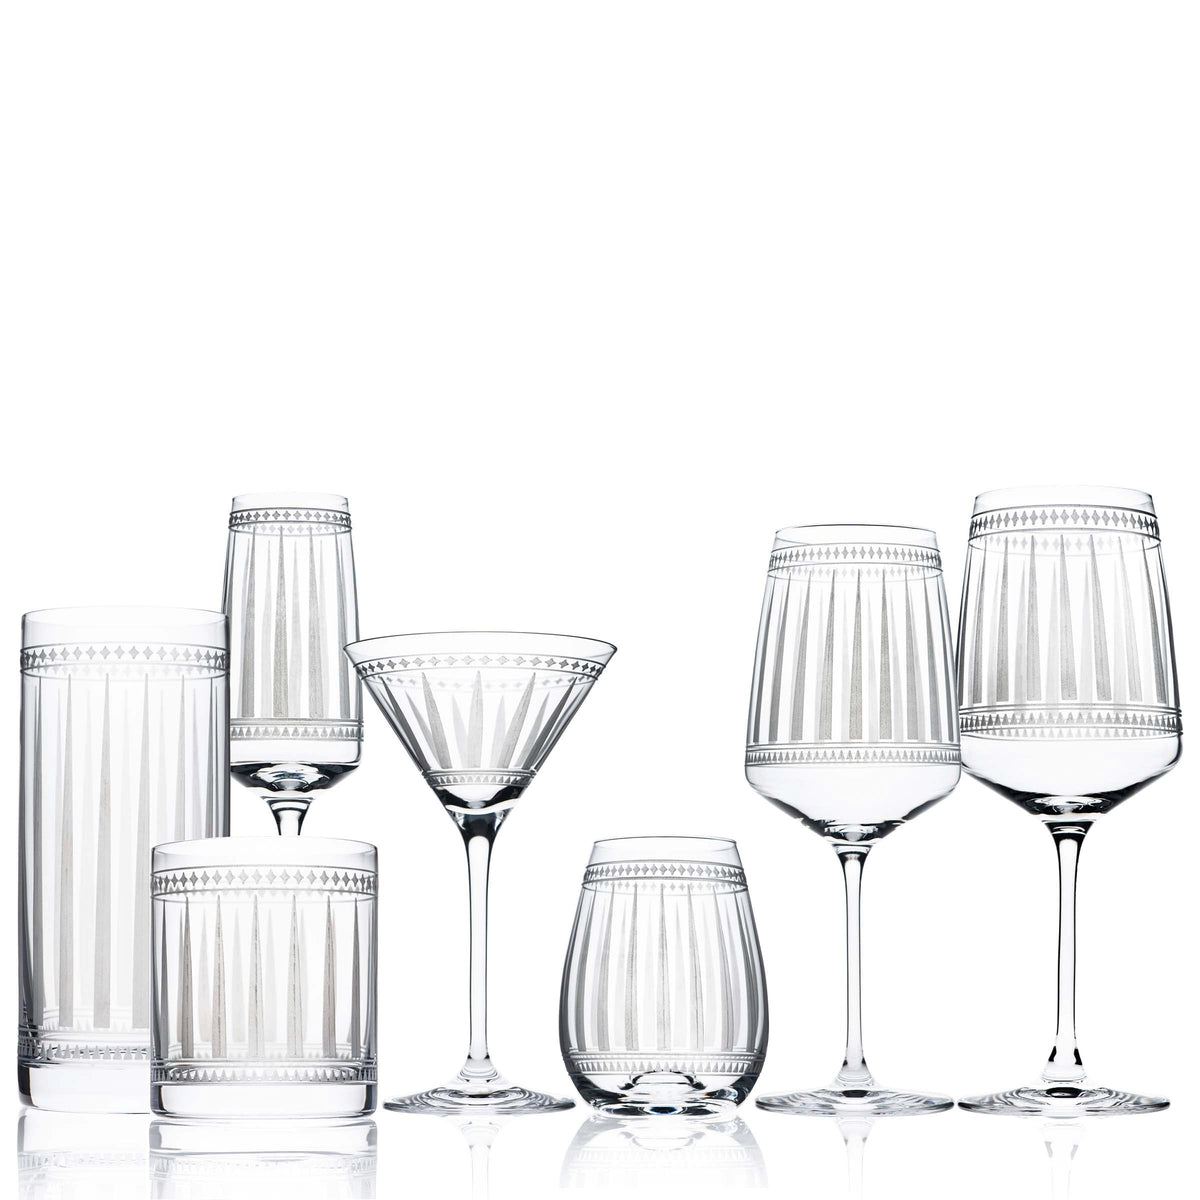 A set of Marrakech Champagne Glasses by Caskata Artisanal Home with graphic patterns over a white background.